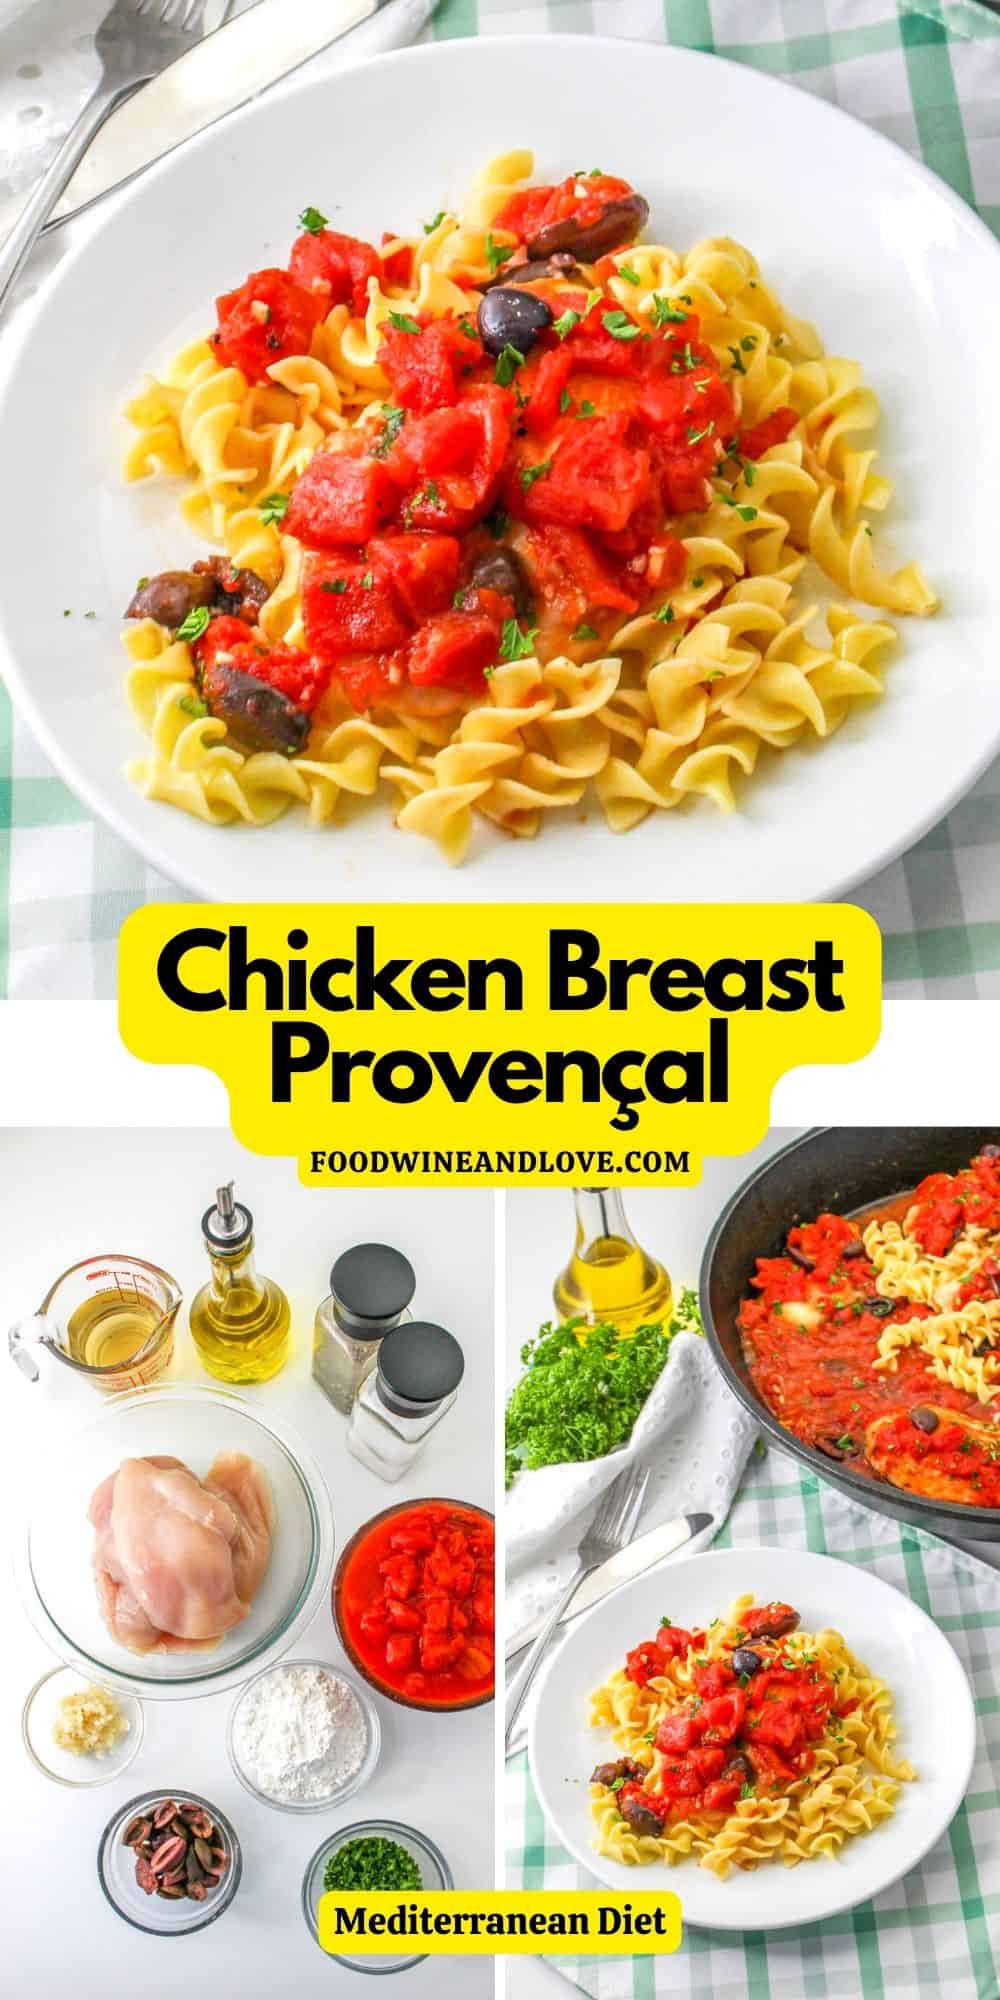 Mediterranean Diet Chicken Breast Provencal, a healthier recipe version inspired by the southern French chicken with tomatoes and olives.